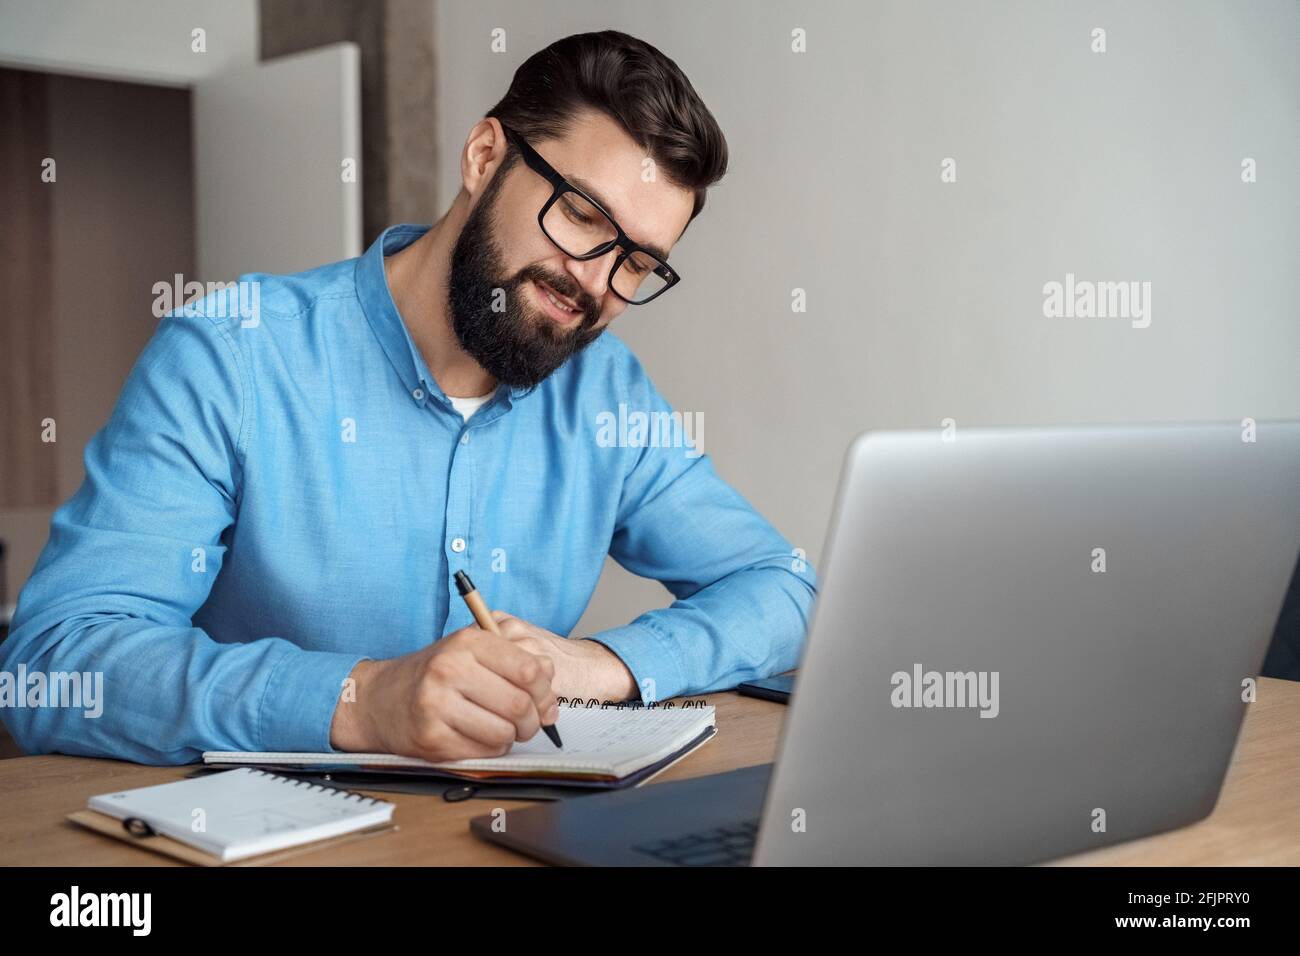 Millennial male student making notes watching webinar on laptop computer Stock Photo